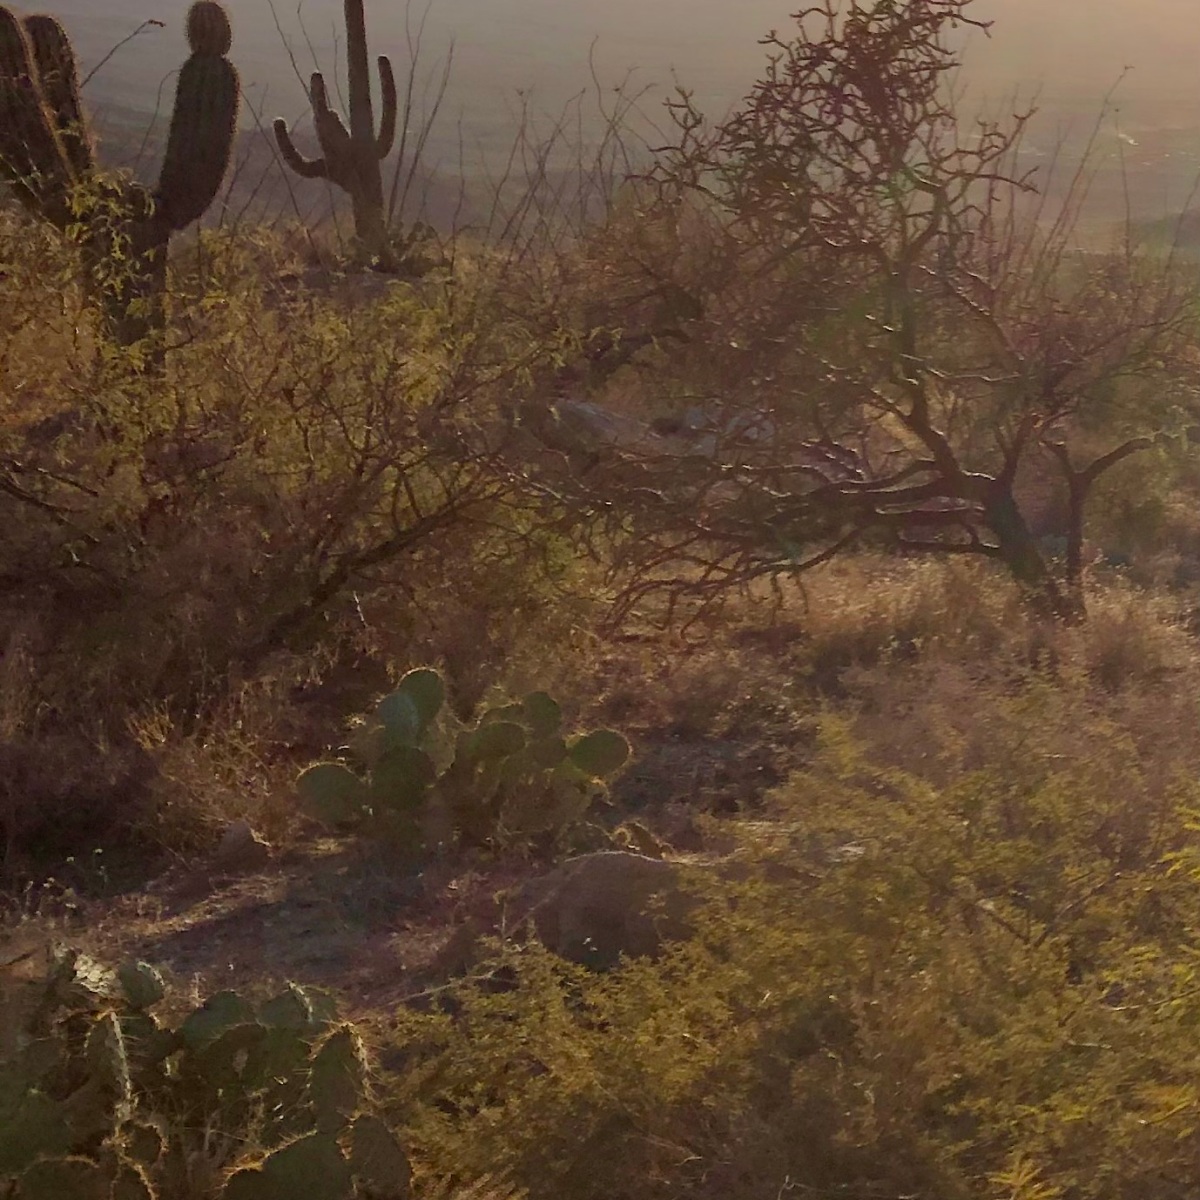 Saguaro, Opuntia and Other Cacti are Permanent Carbon Sinks